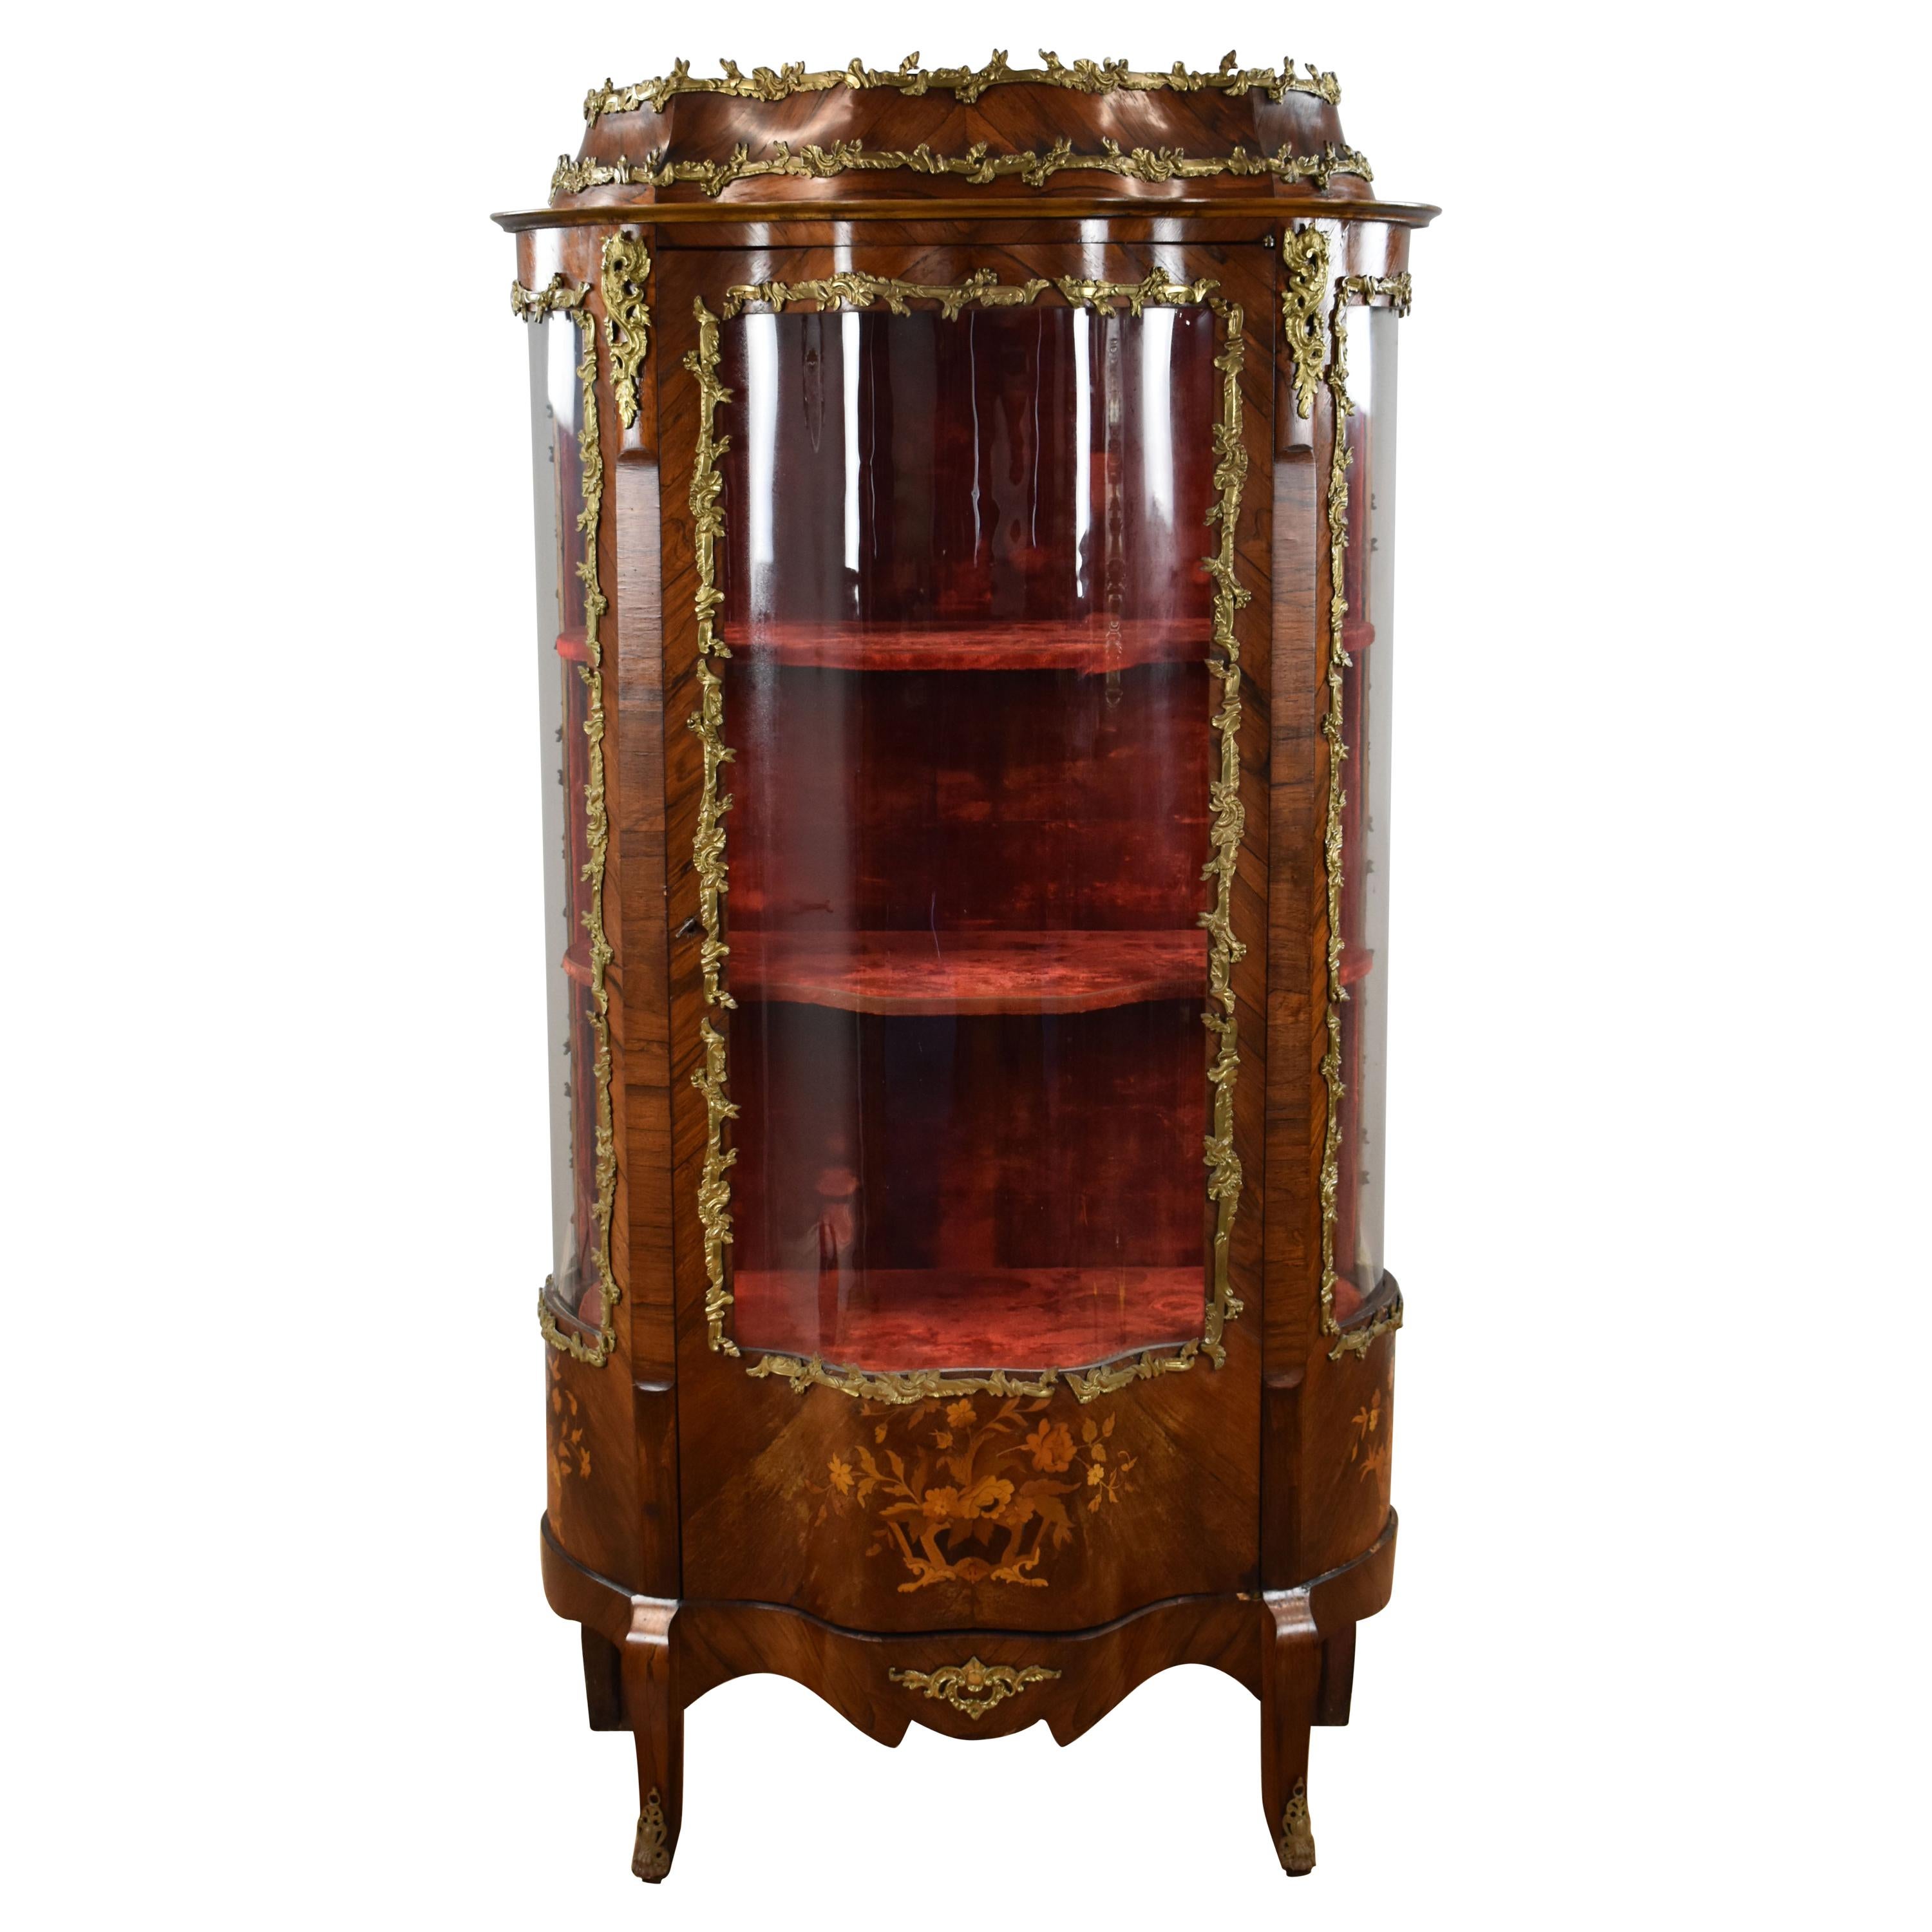 19th Century French Rosewood & Marquetry Serpentine Vitrine